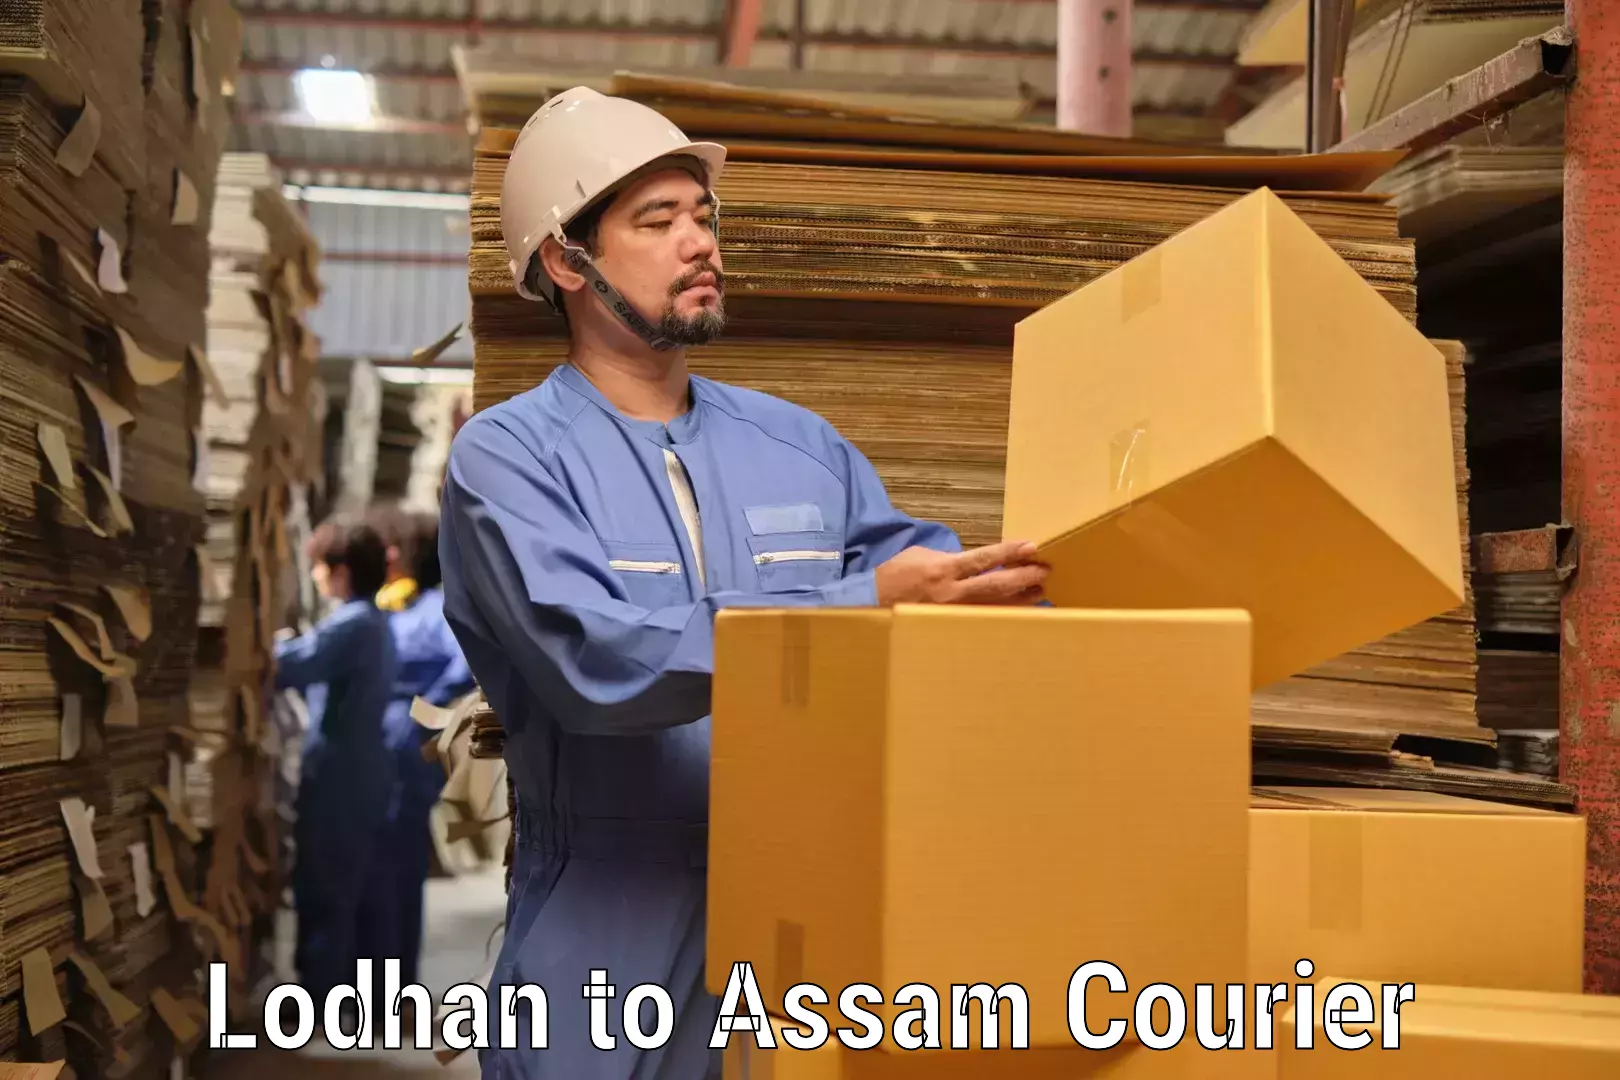 Courier service innovation Lodhan to Assam